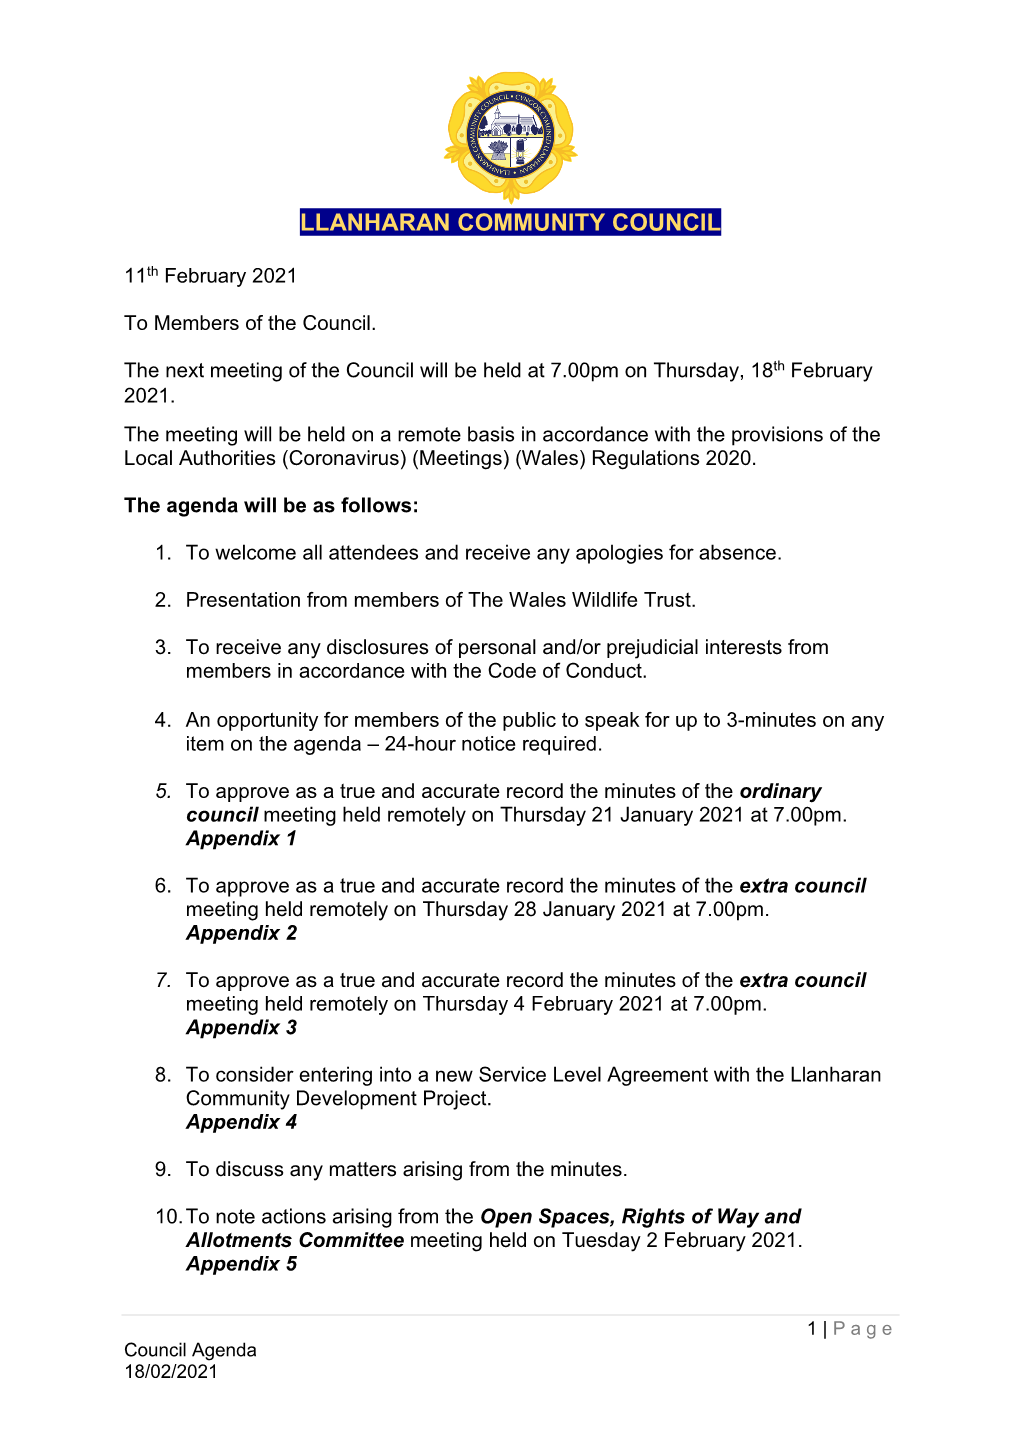 Council Agenda & Papers February 2021